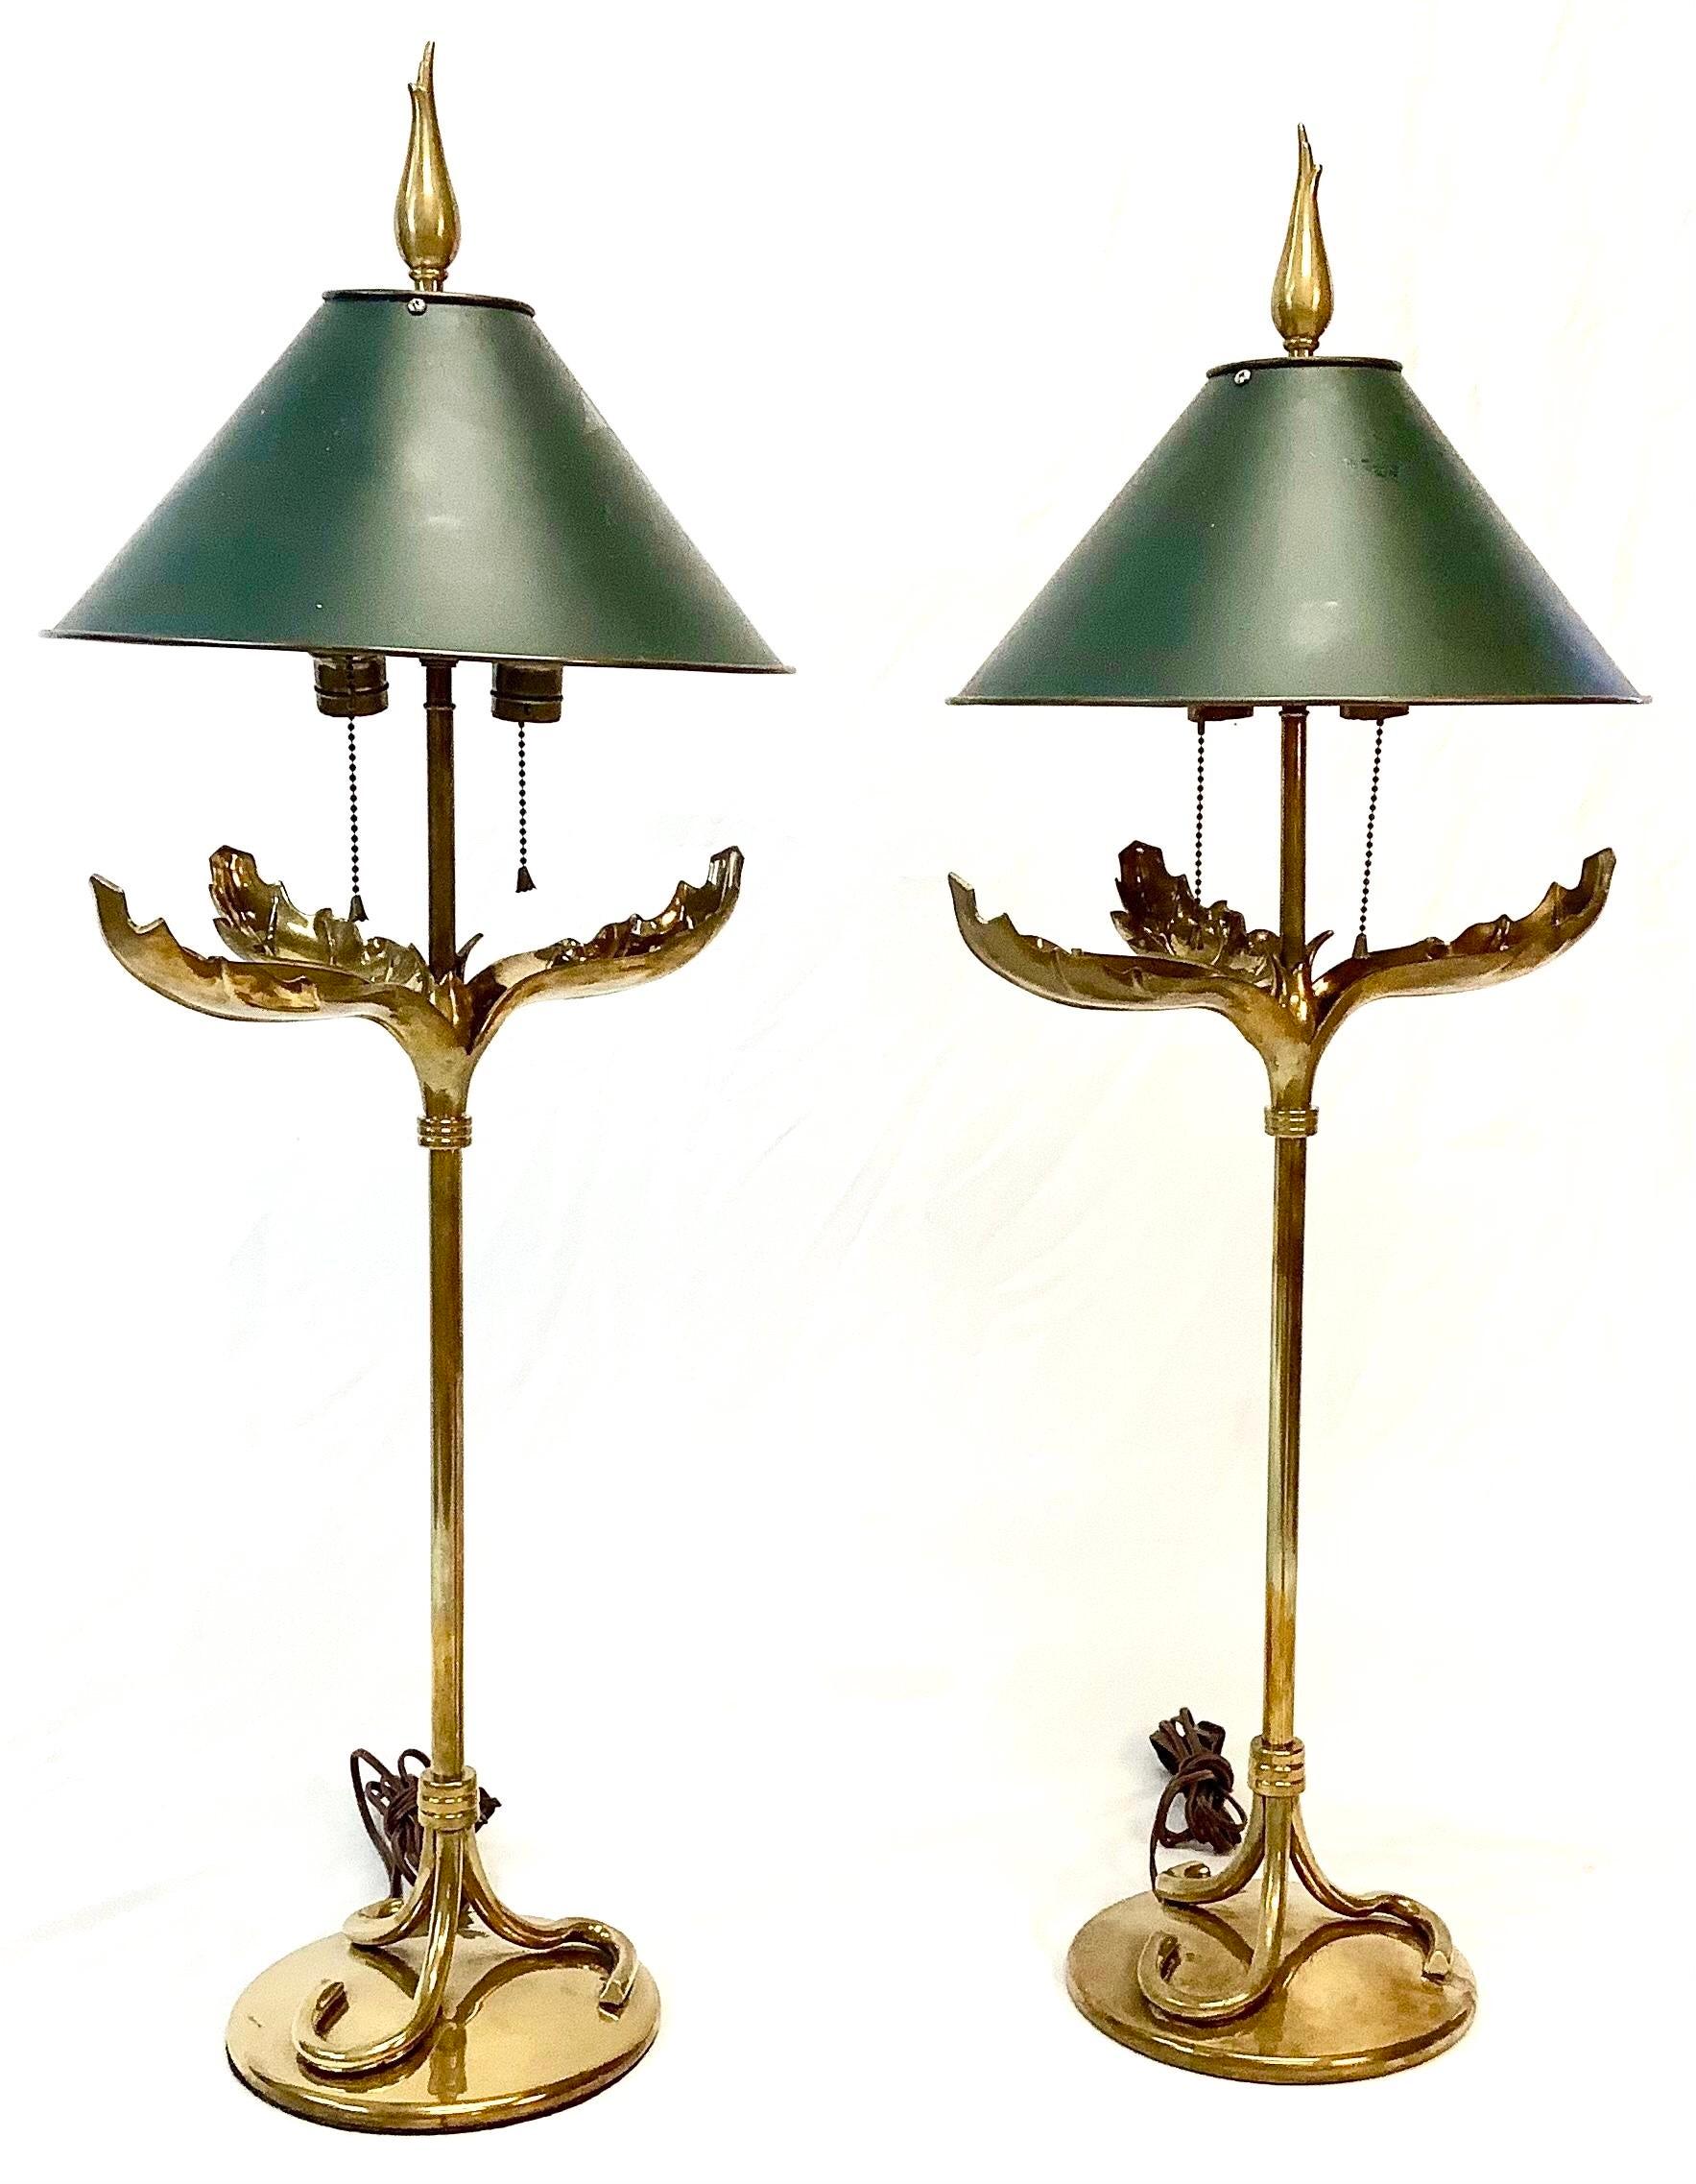 20th Century Pair of Mid-Century Chapman Brass Palm Leaf Lamps with Tole Shades